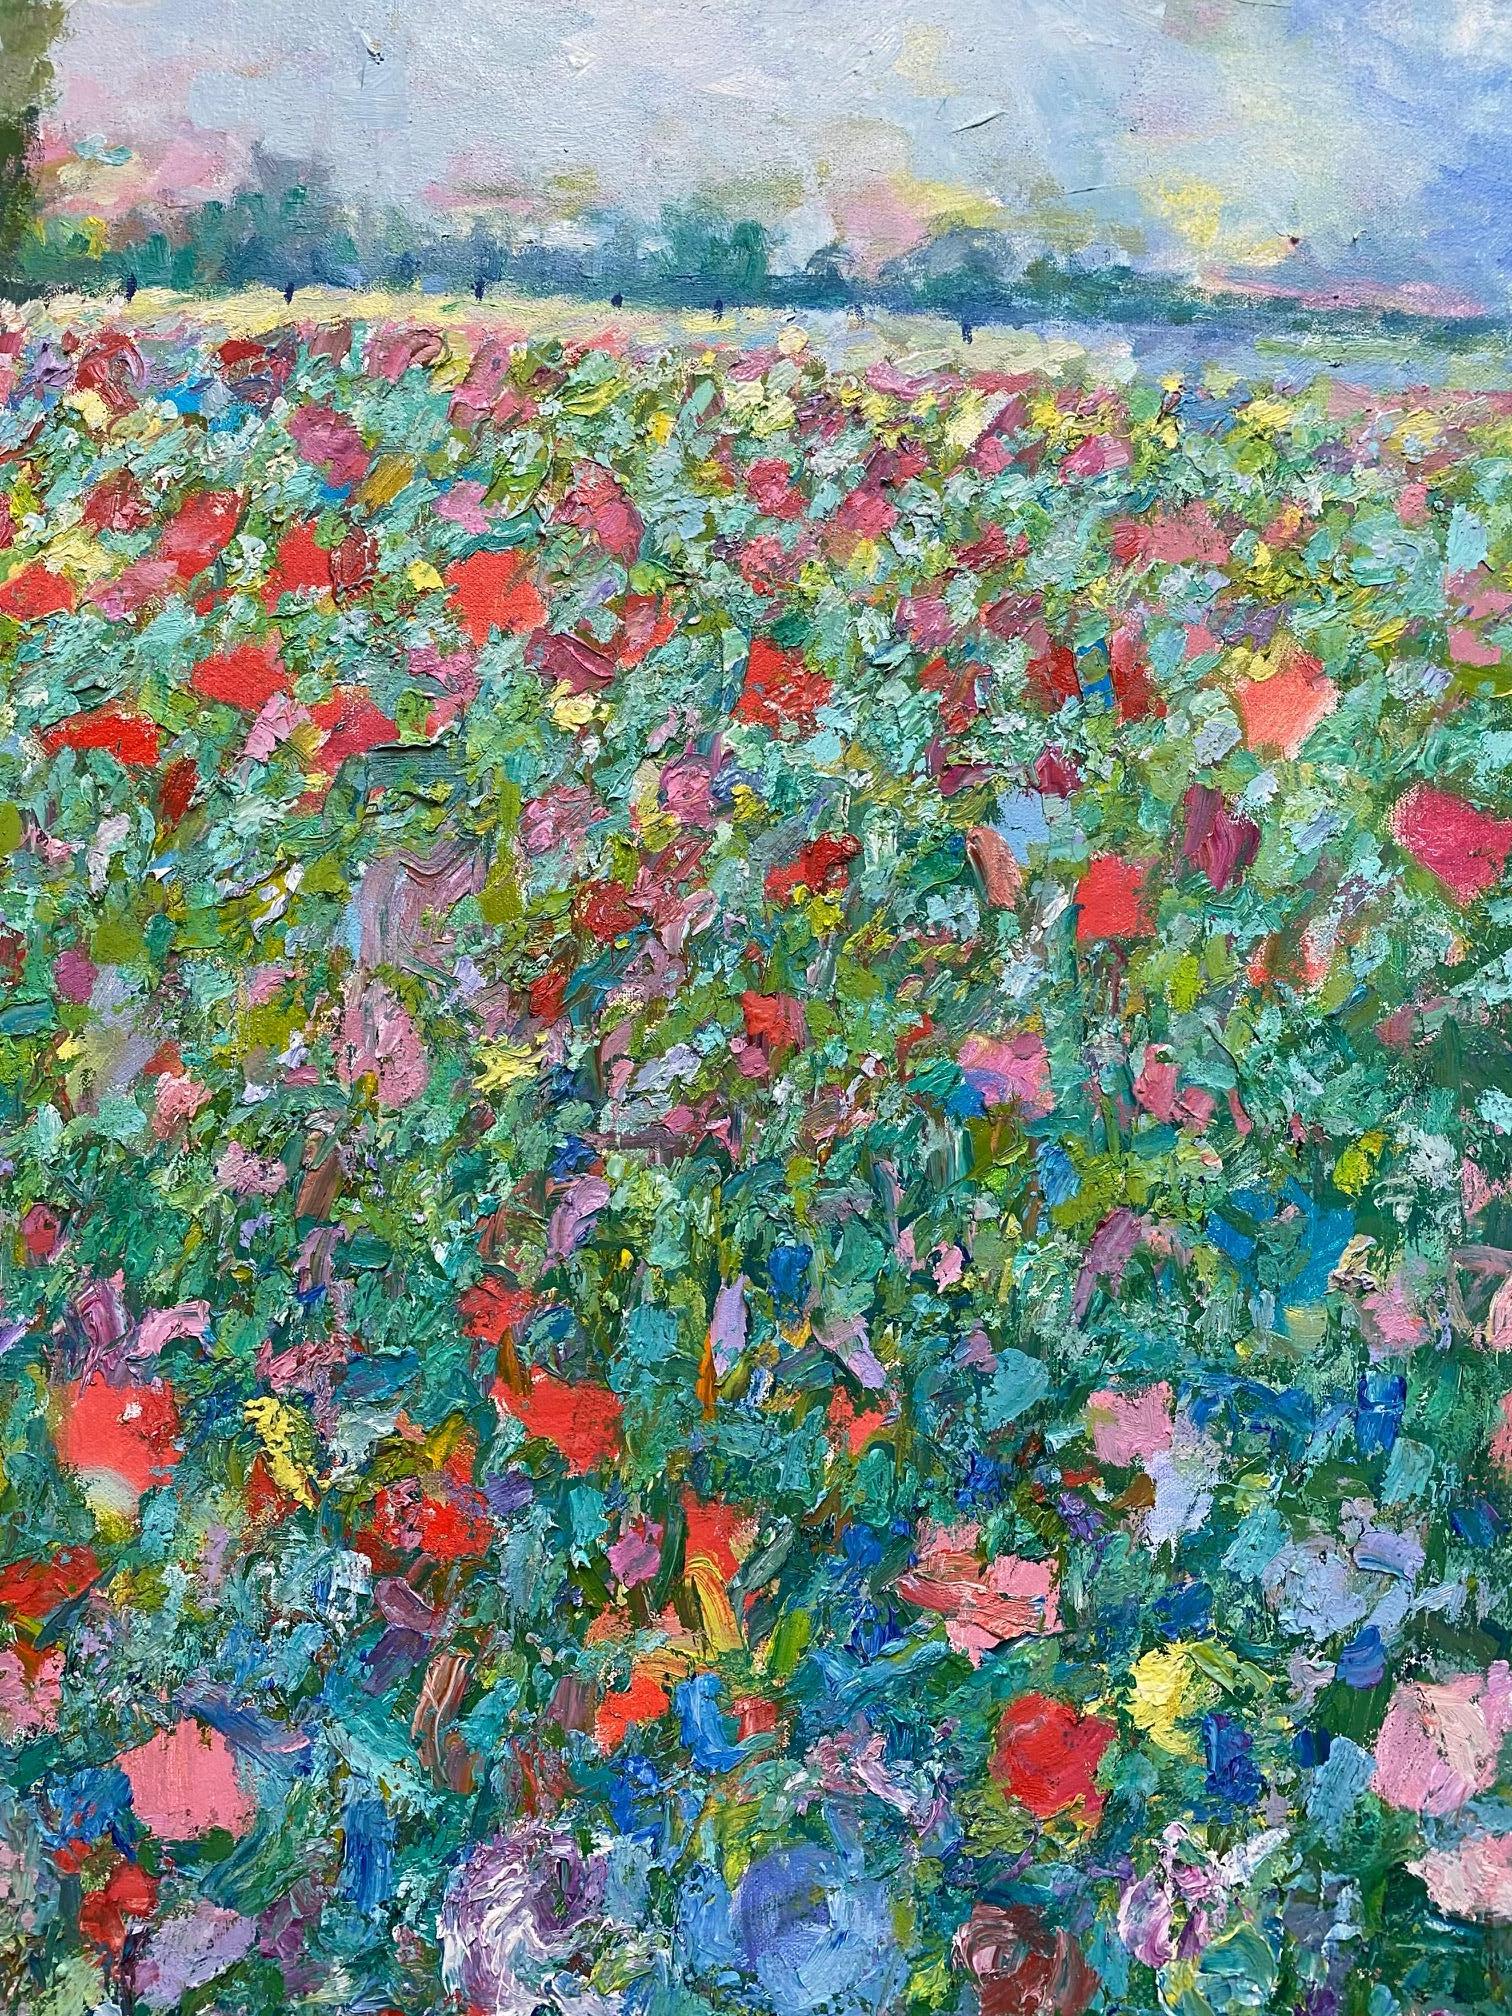 A homestead with seemingly endless fields of flowers in an eternal spring has been the fantasy of not only the legendary French Impressionists but of humanity.  This original contemporary landscape comes alive as the sun washed flowers, with their